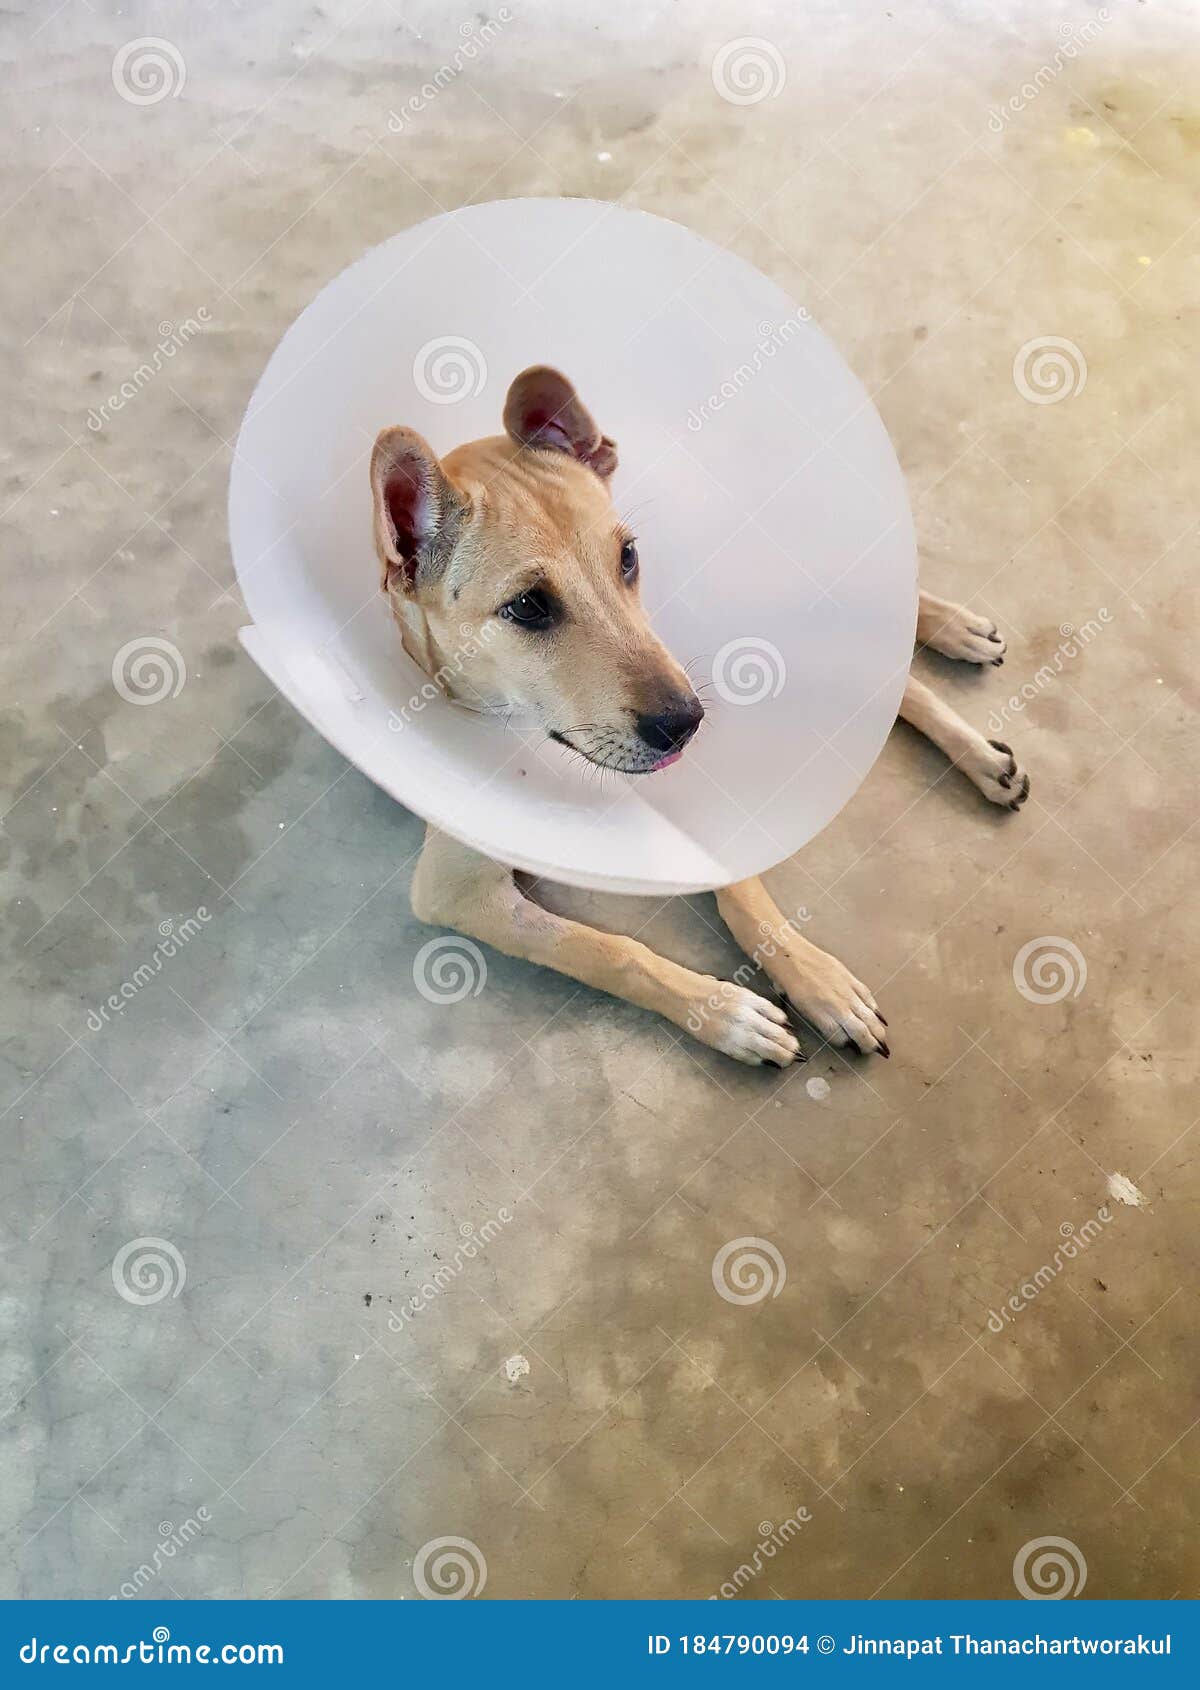 Dogs Wear Head Covers To Prevent Licking the Wound. Stock Photo - Image of  funnel, injury: 184790094